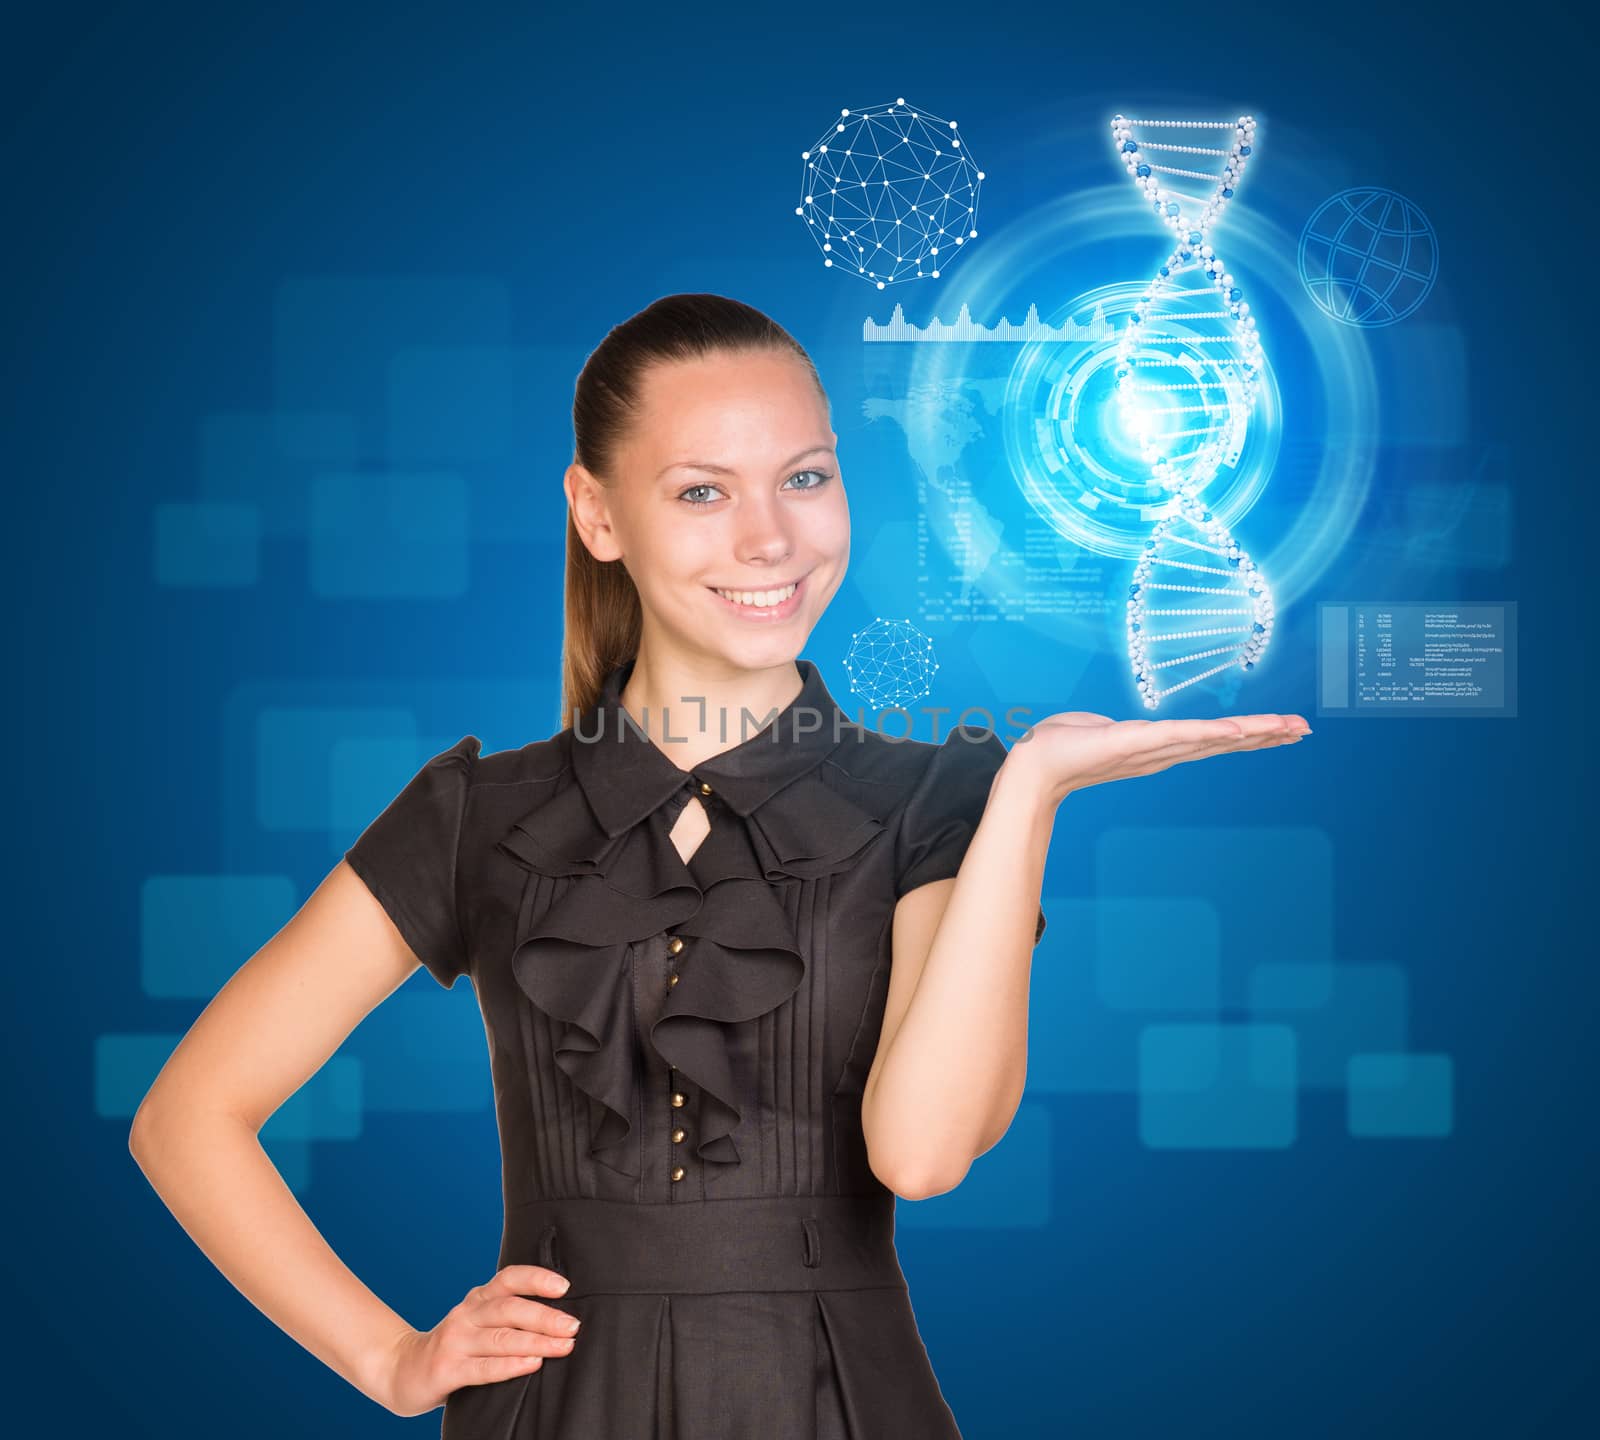 Beautiful businesswoman in dress smiling and holding model of DNA by cherezoff